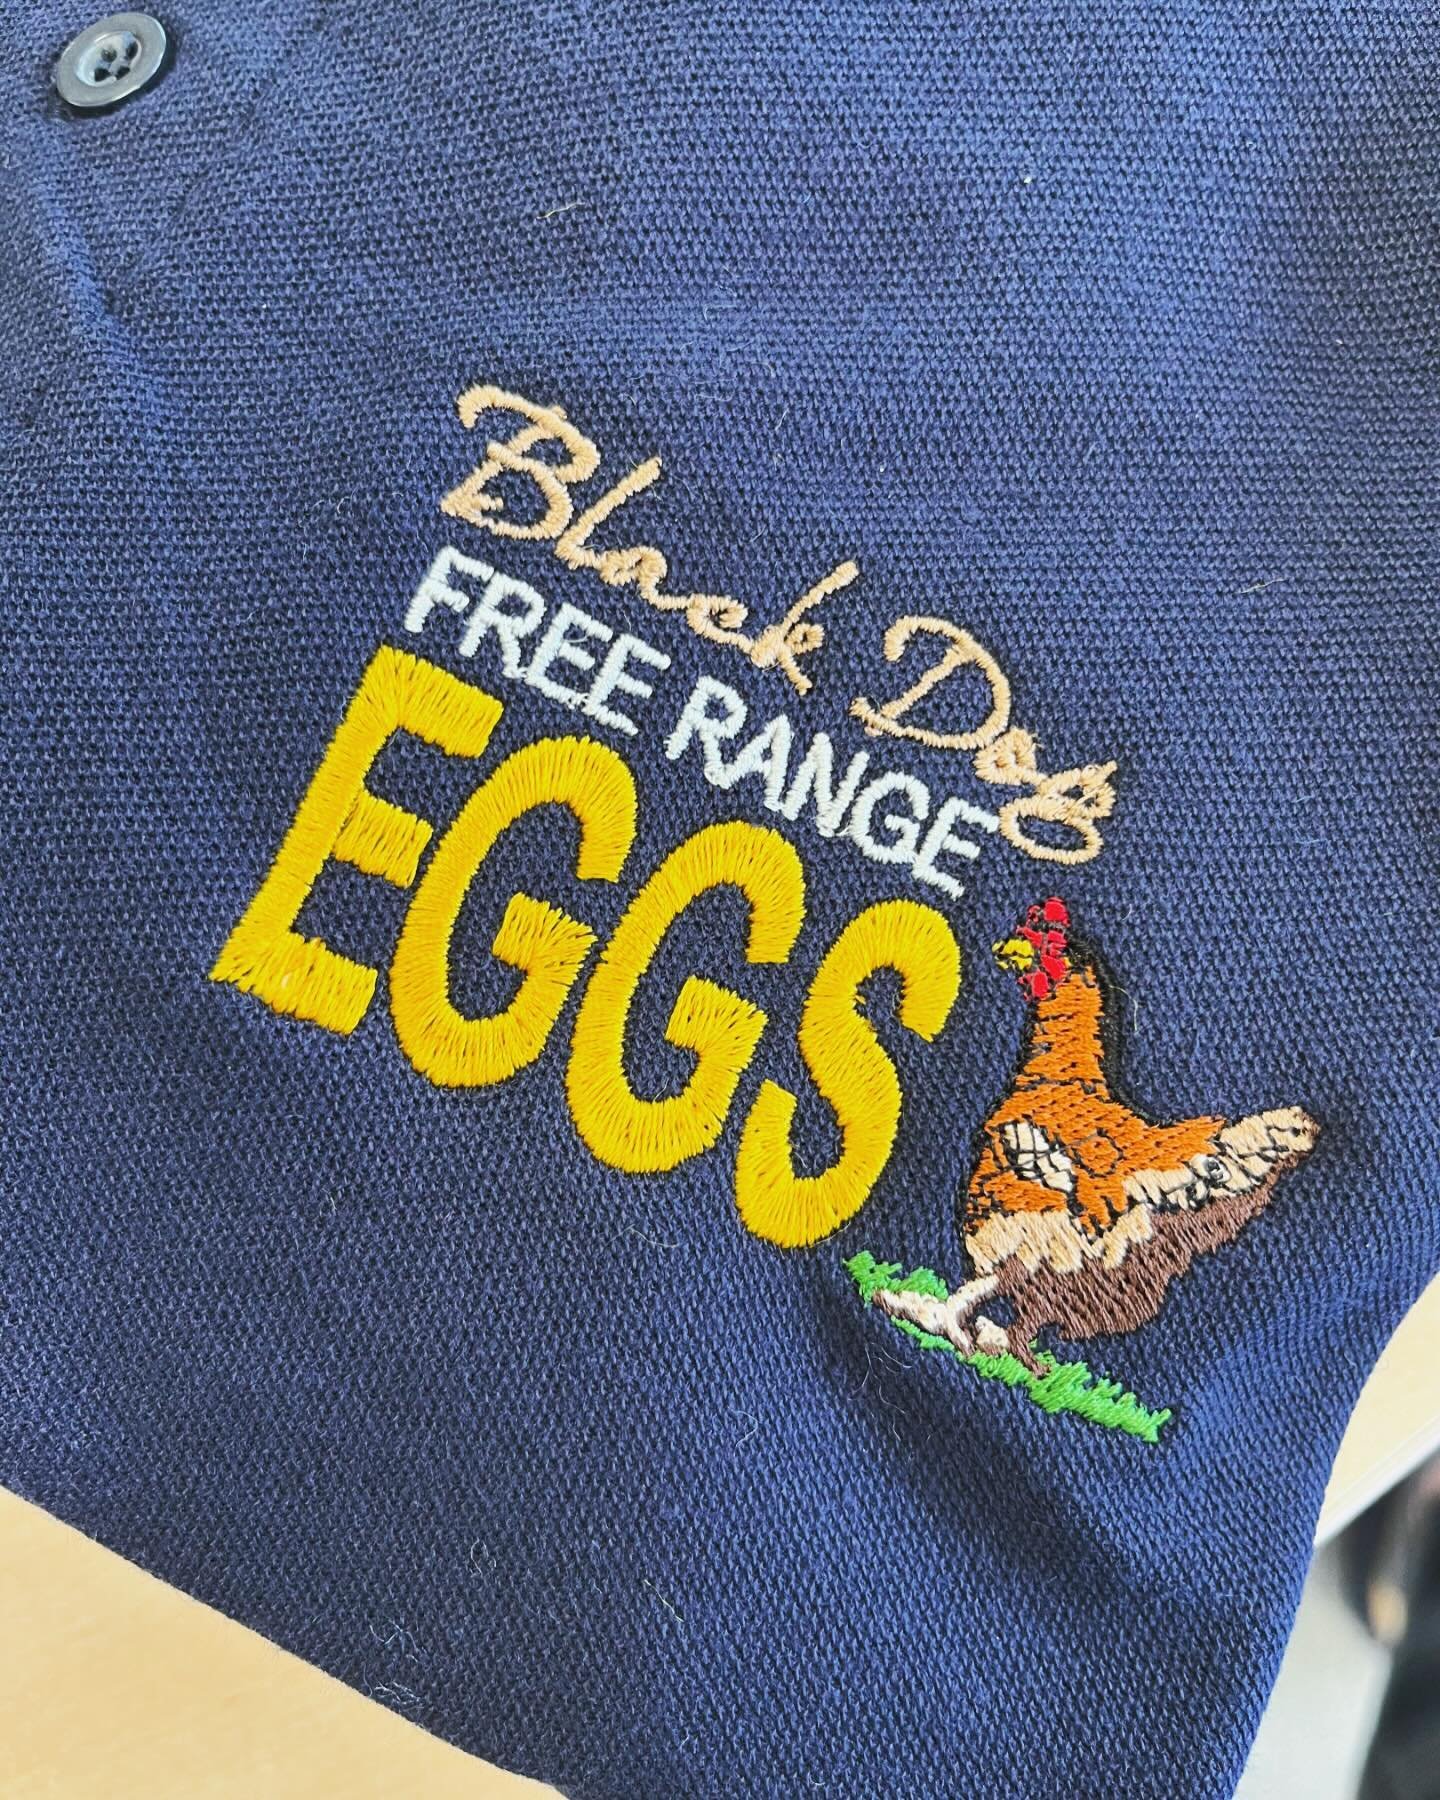 Another lovely design from our commercial department for a great local business Black Dog Eggs #localbusiness #smallbusiness #embroideredworkwear